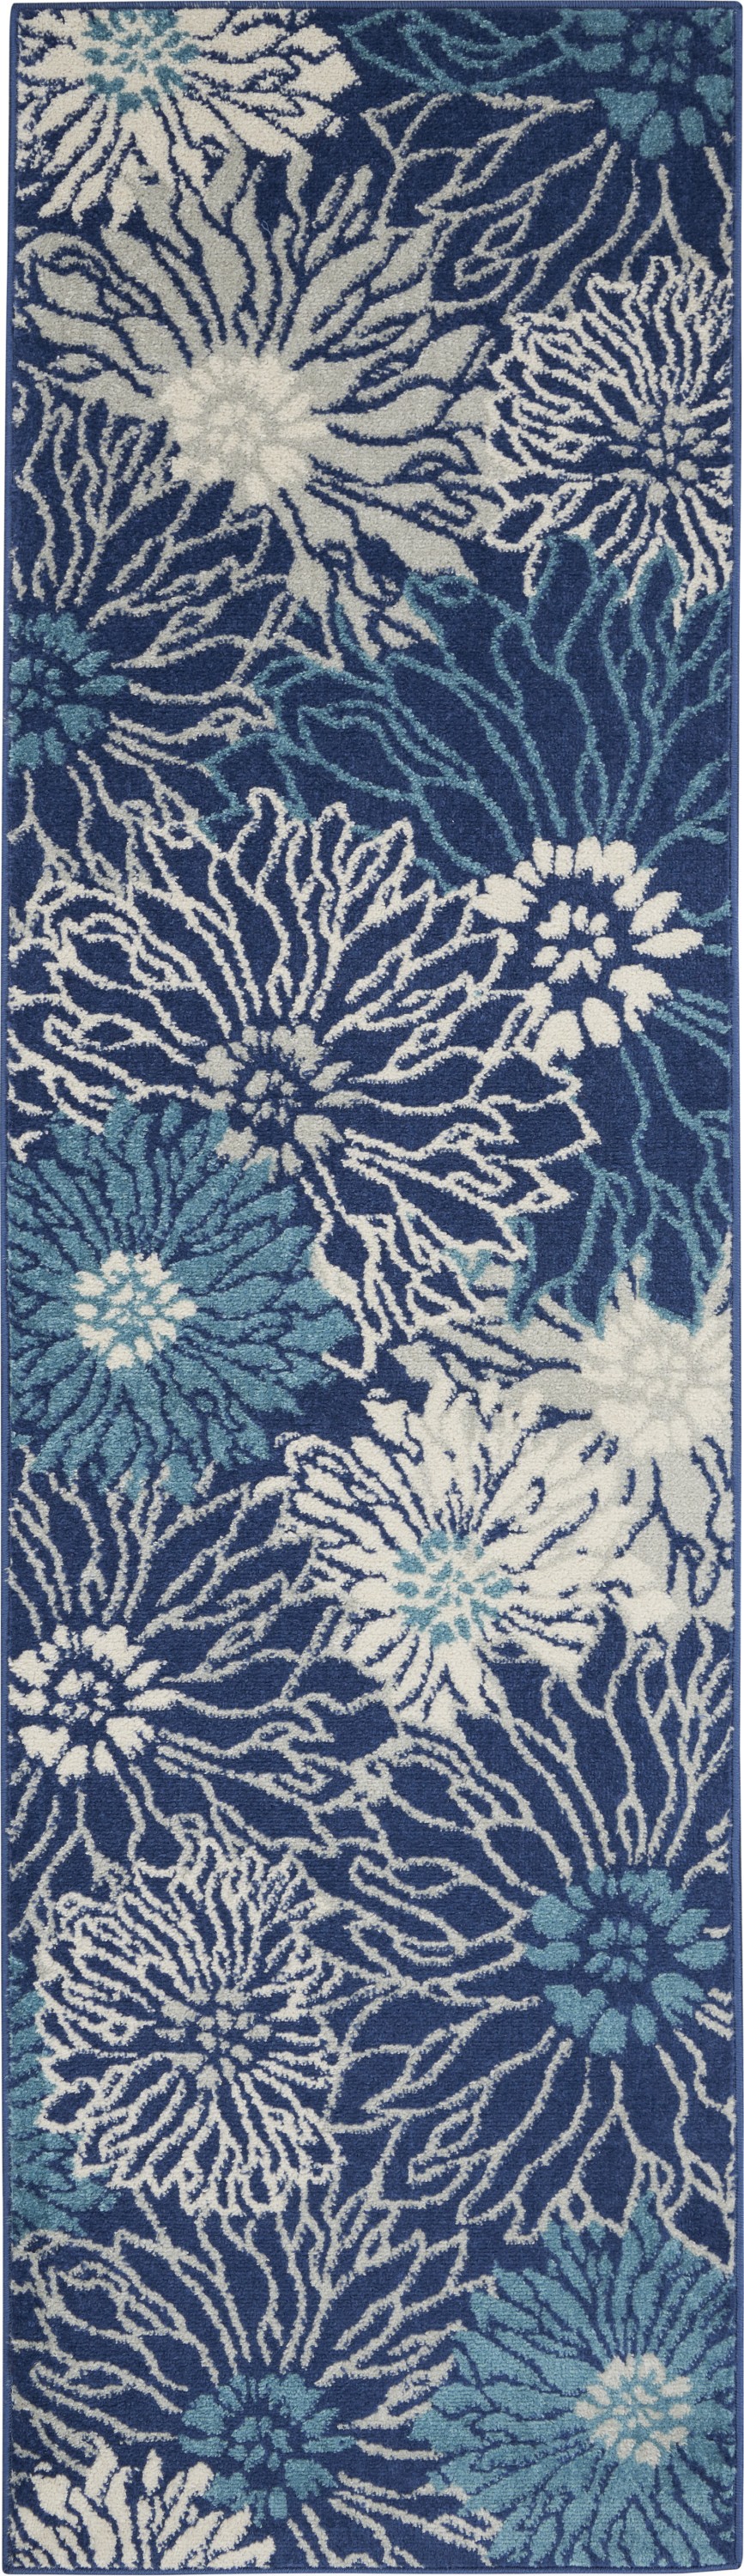 8' Blue And Ivory Floral Power Loom Runner Rug-385432-1